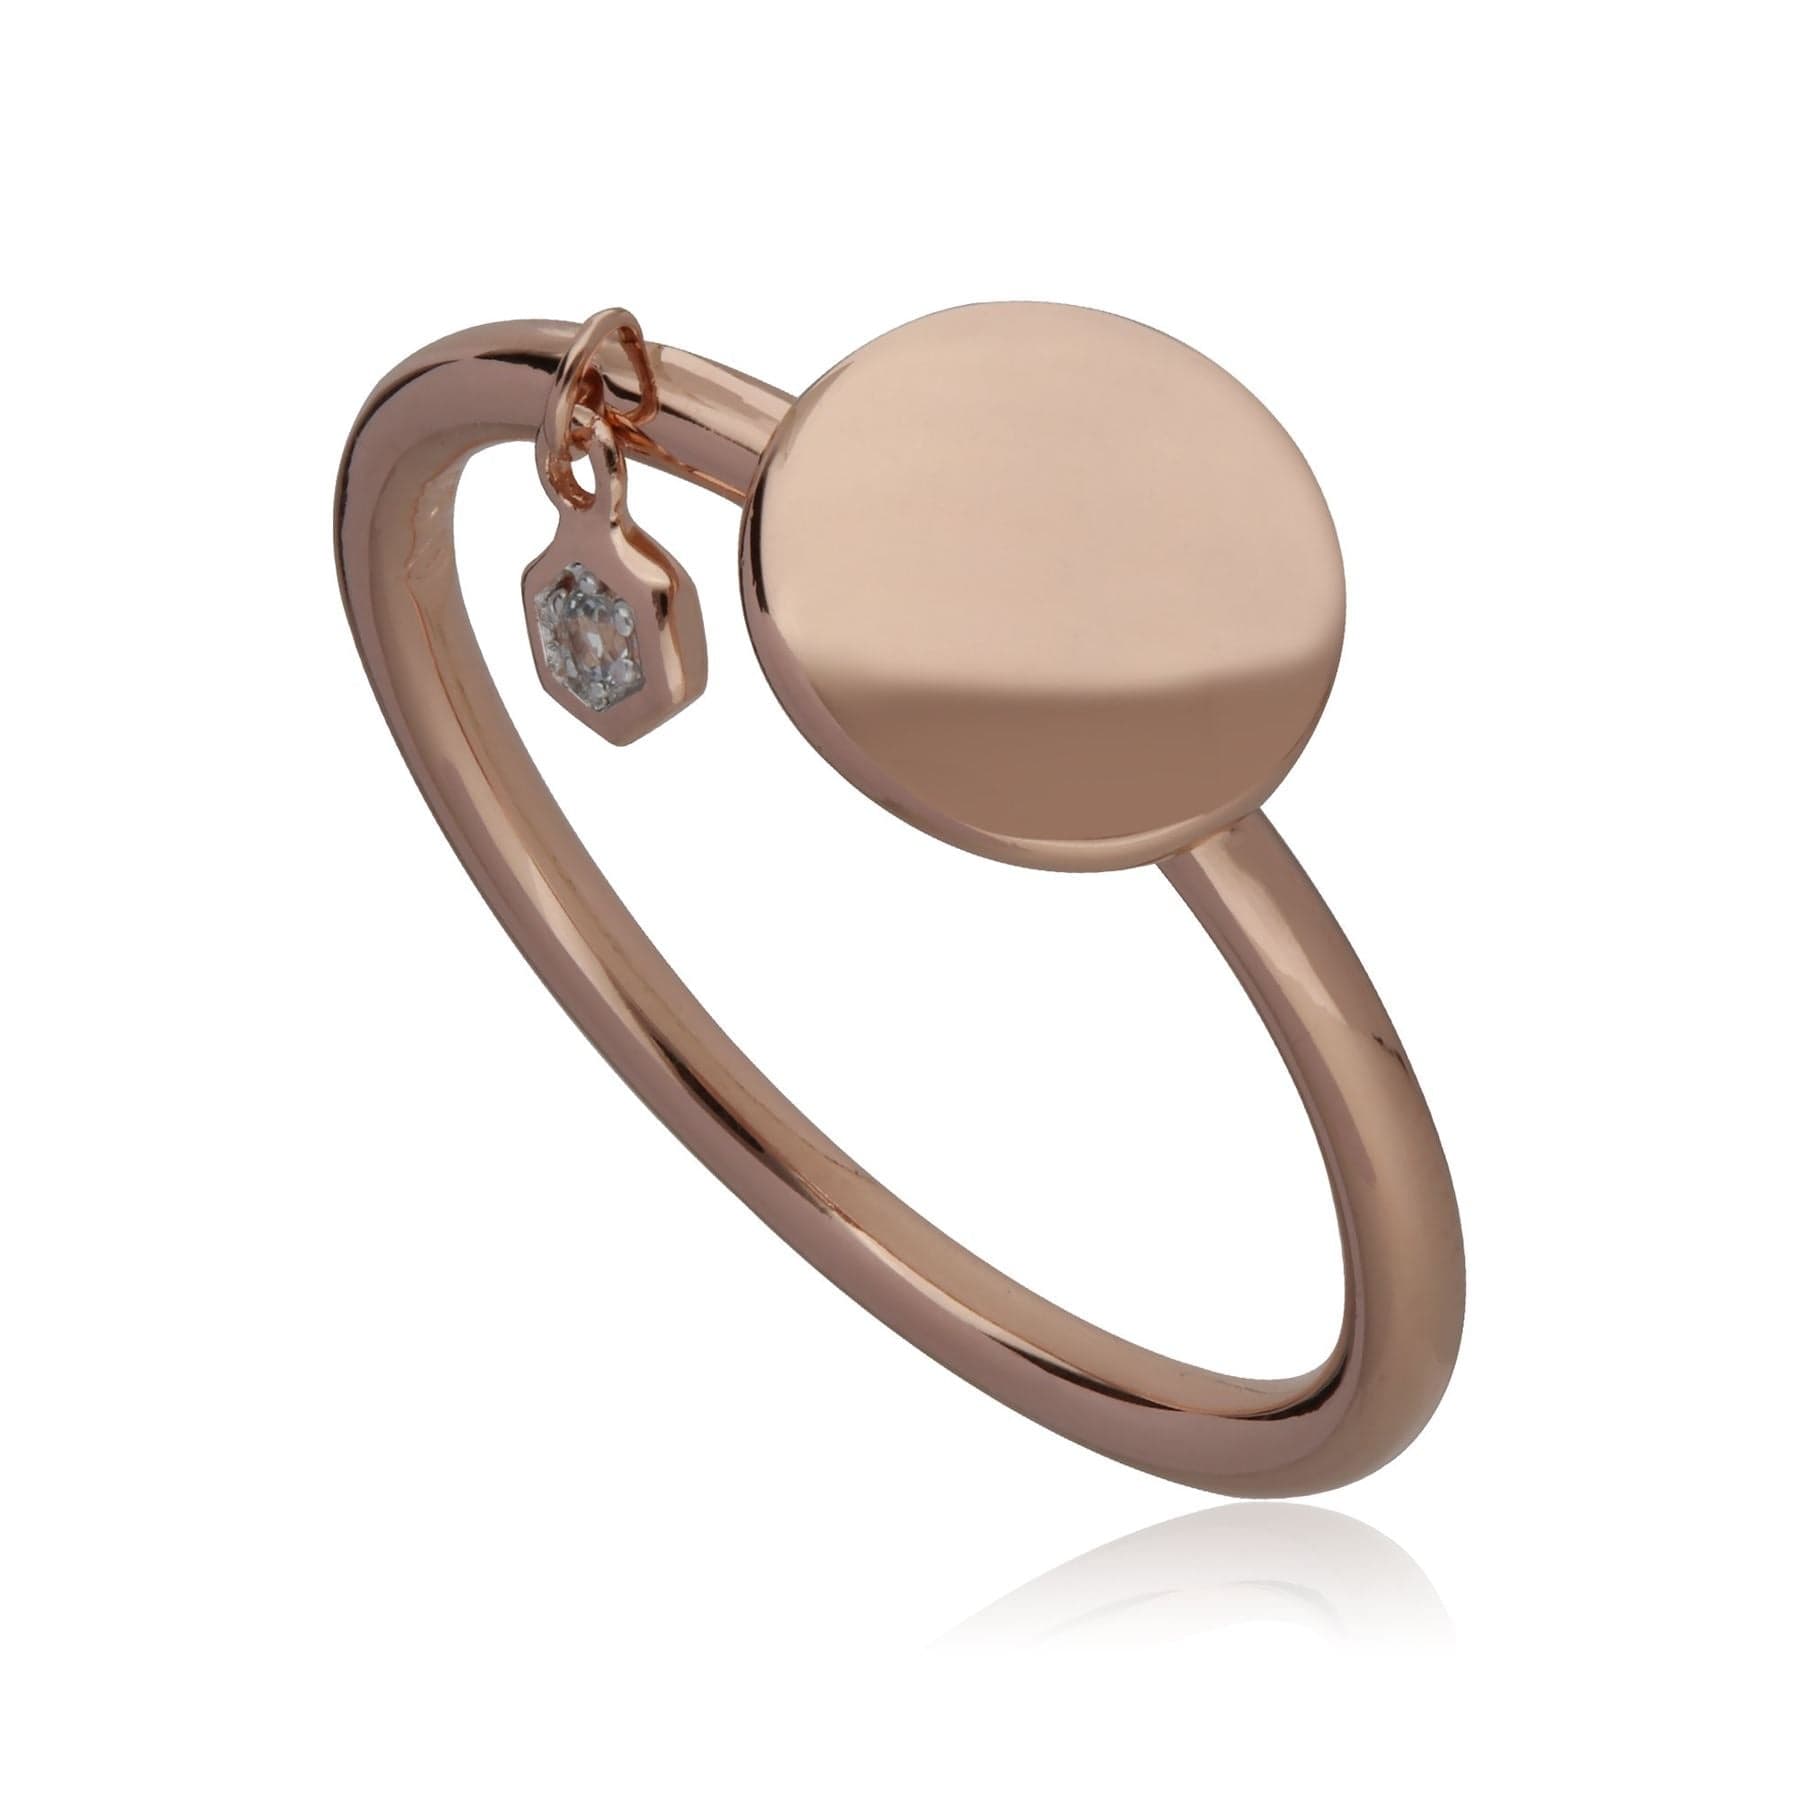 Topaz Engravable Ring in Rose Gold Plated Sterling Silver - Gemondo